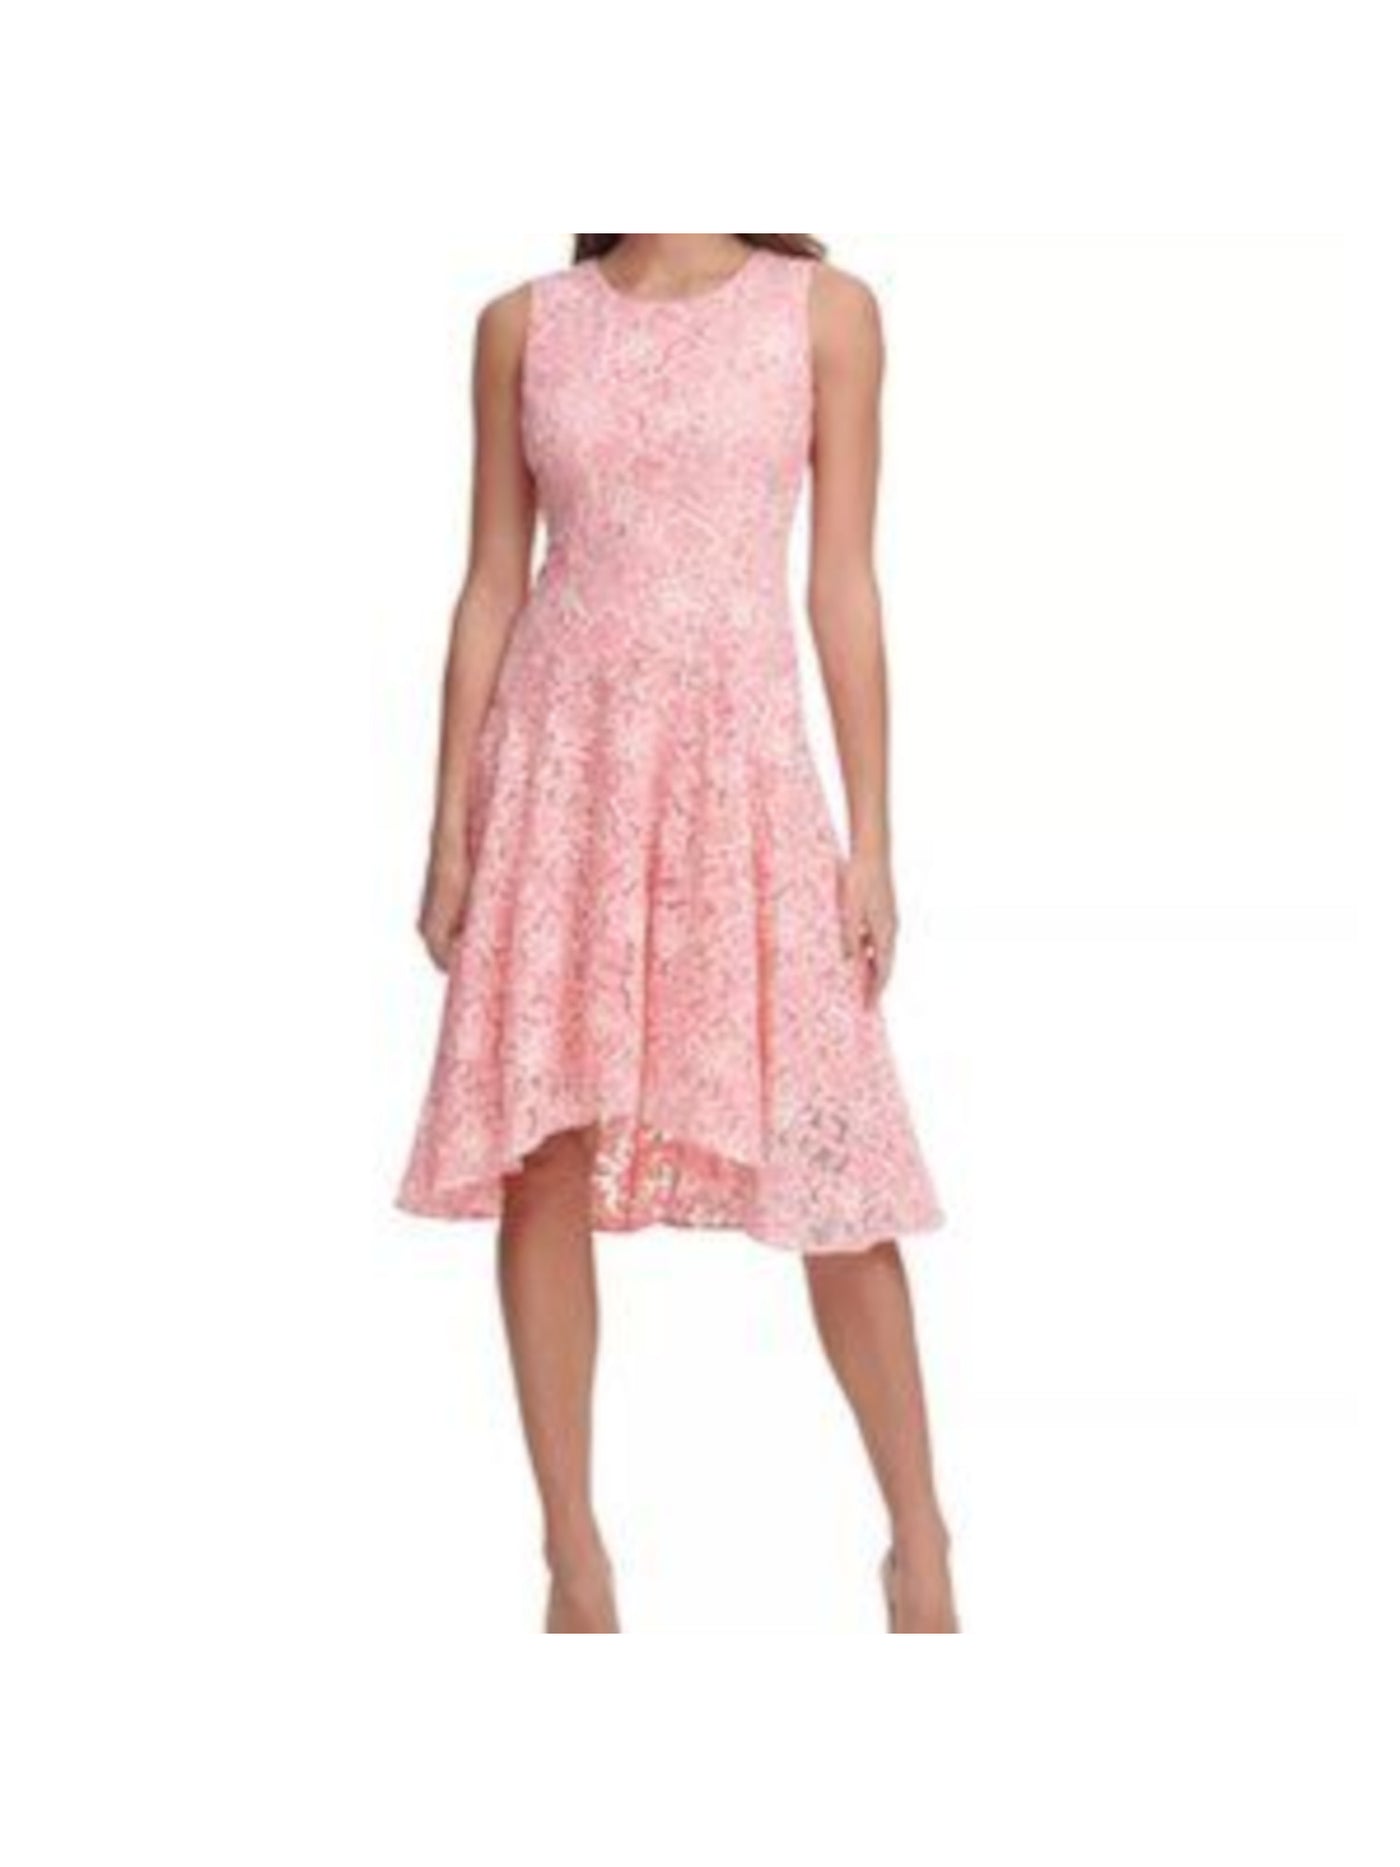 TOMMY HILFIGER Womens Coral Zippered Lace High-low Hem Floral Sleeveless Jewel Neck Below The Knee Evening Fit + Flare Dress 2